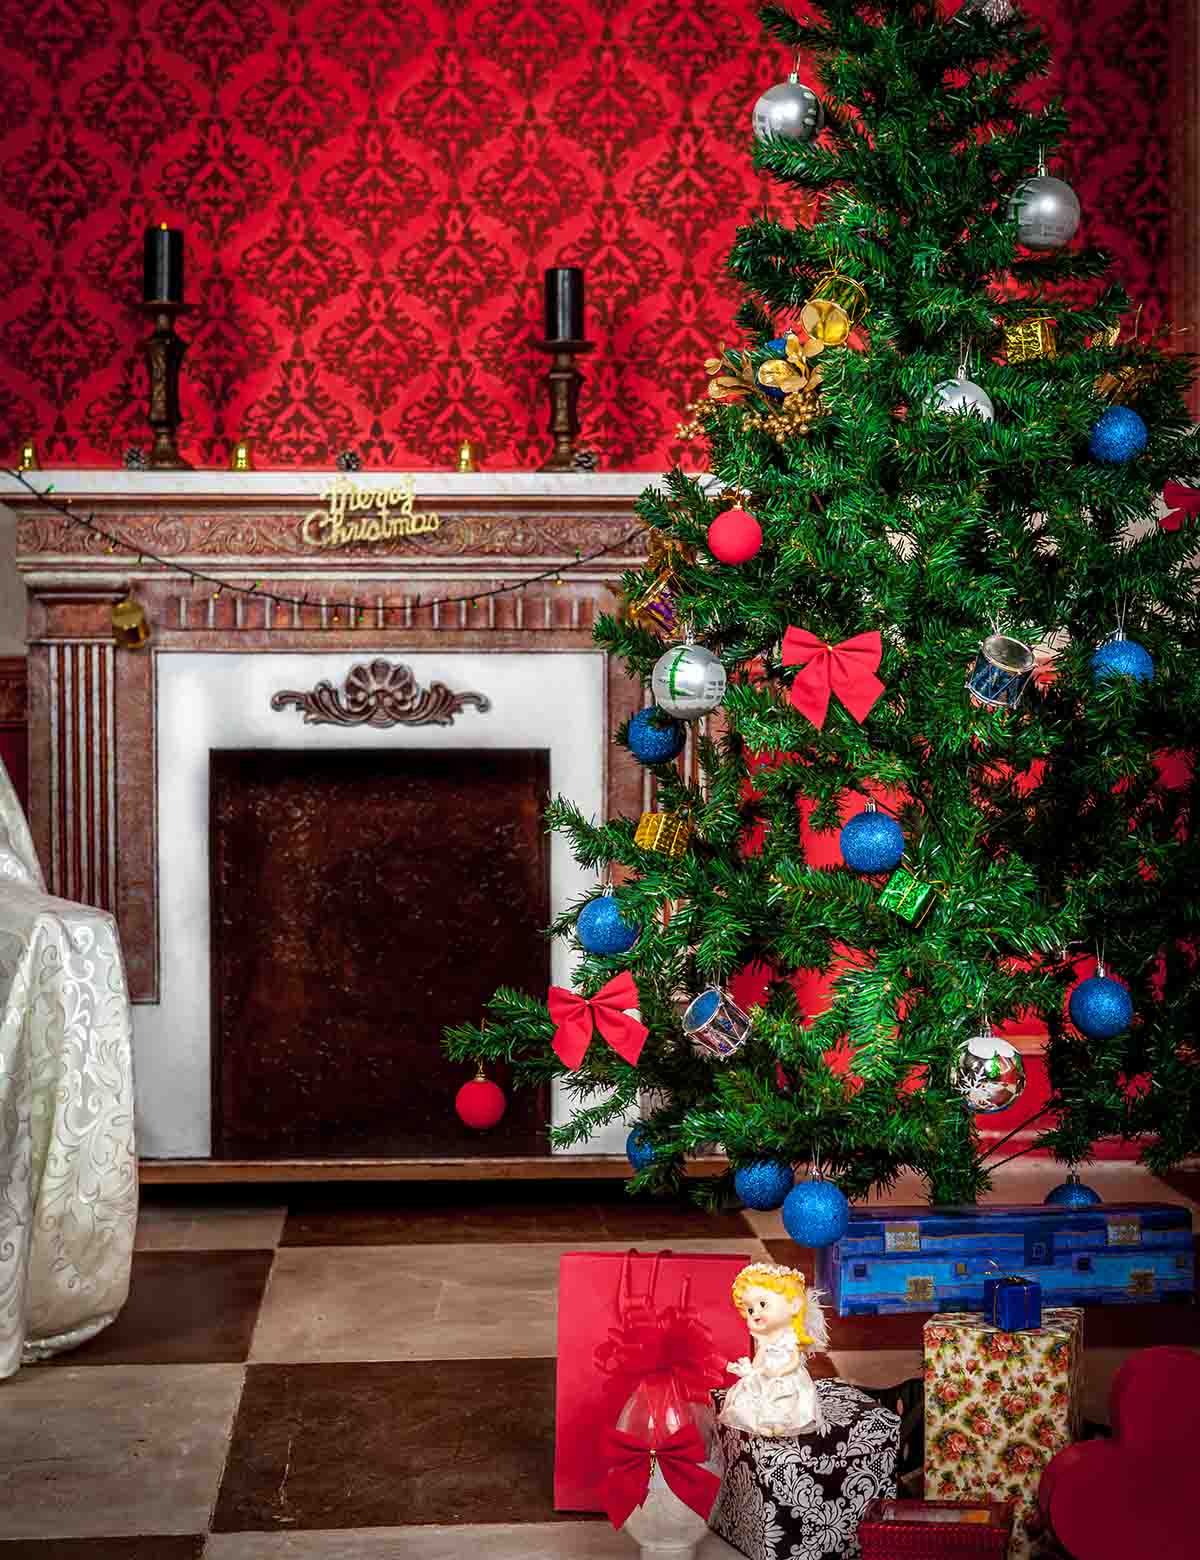 Christmas Holiday Backdrop With Fireplace And Christmas Tree Shopbackdrop